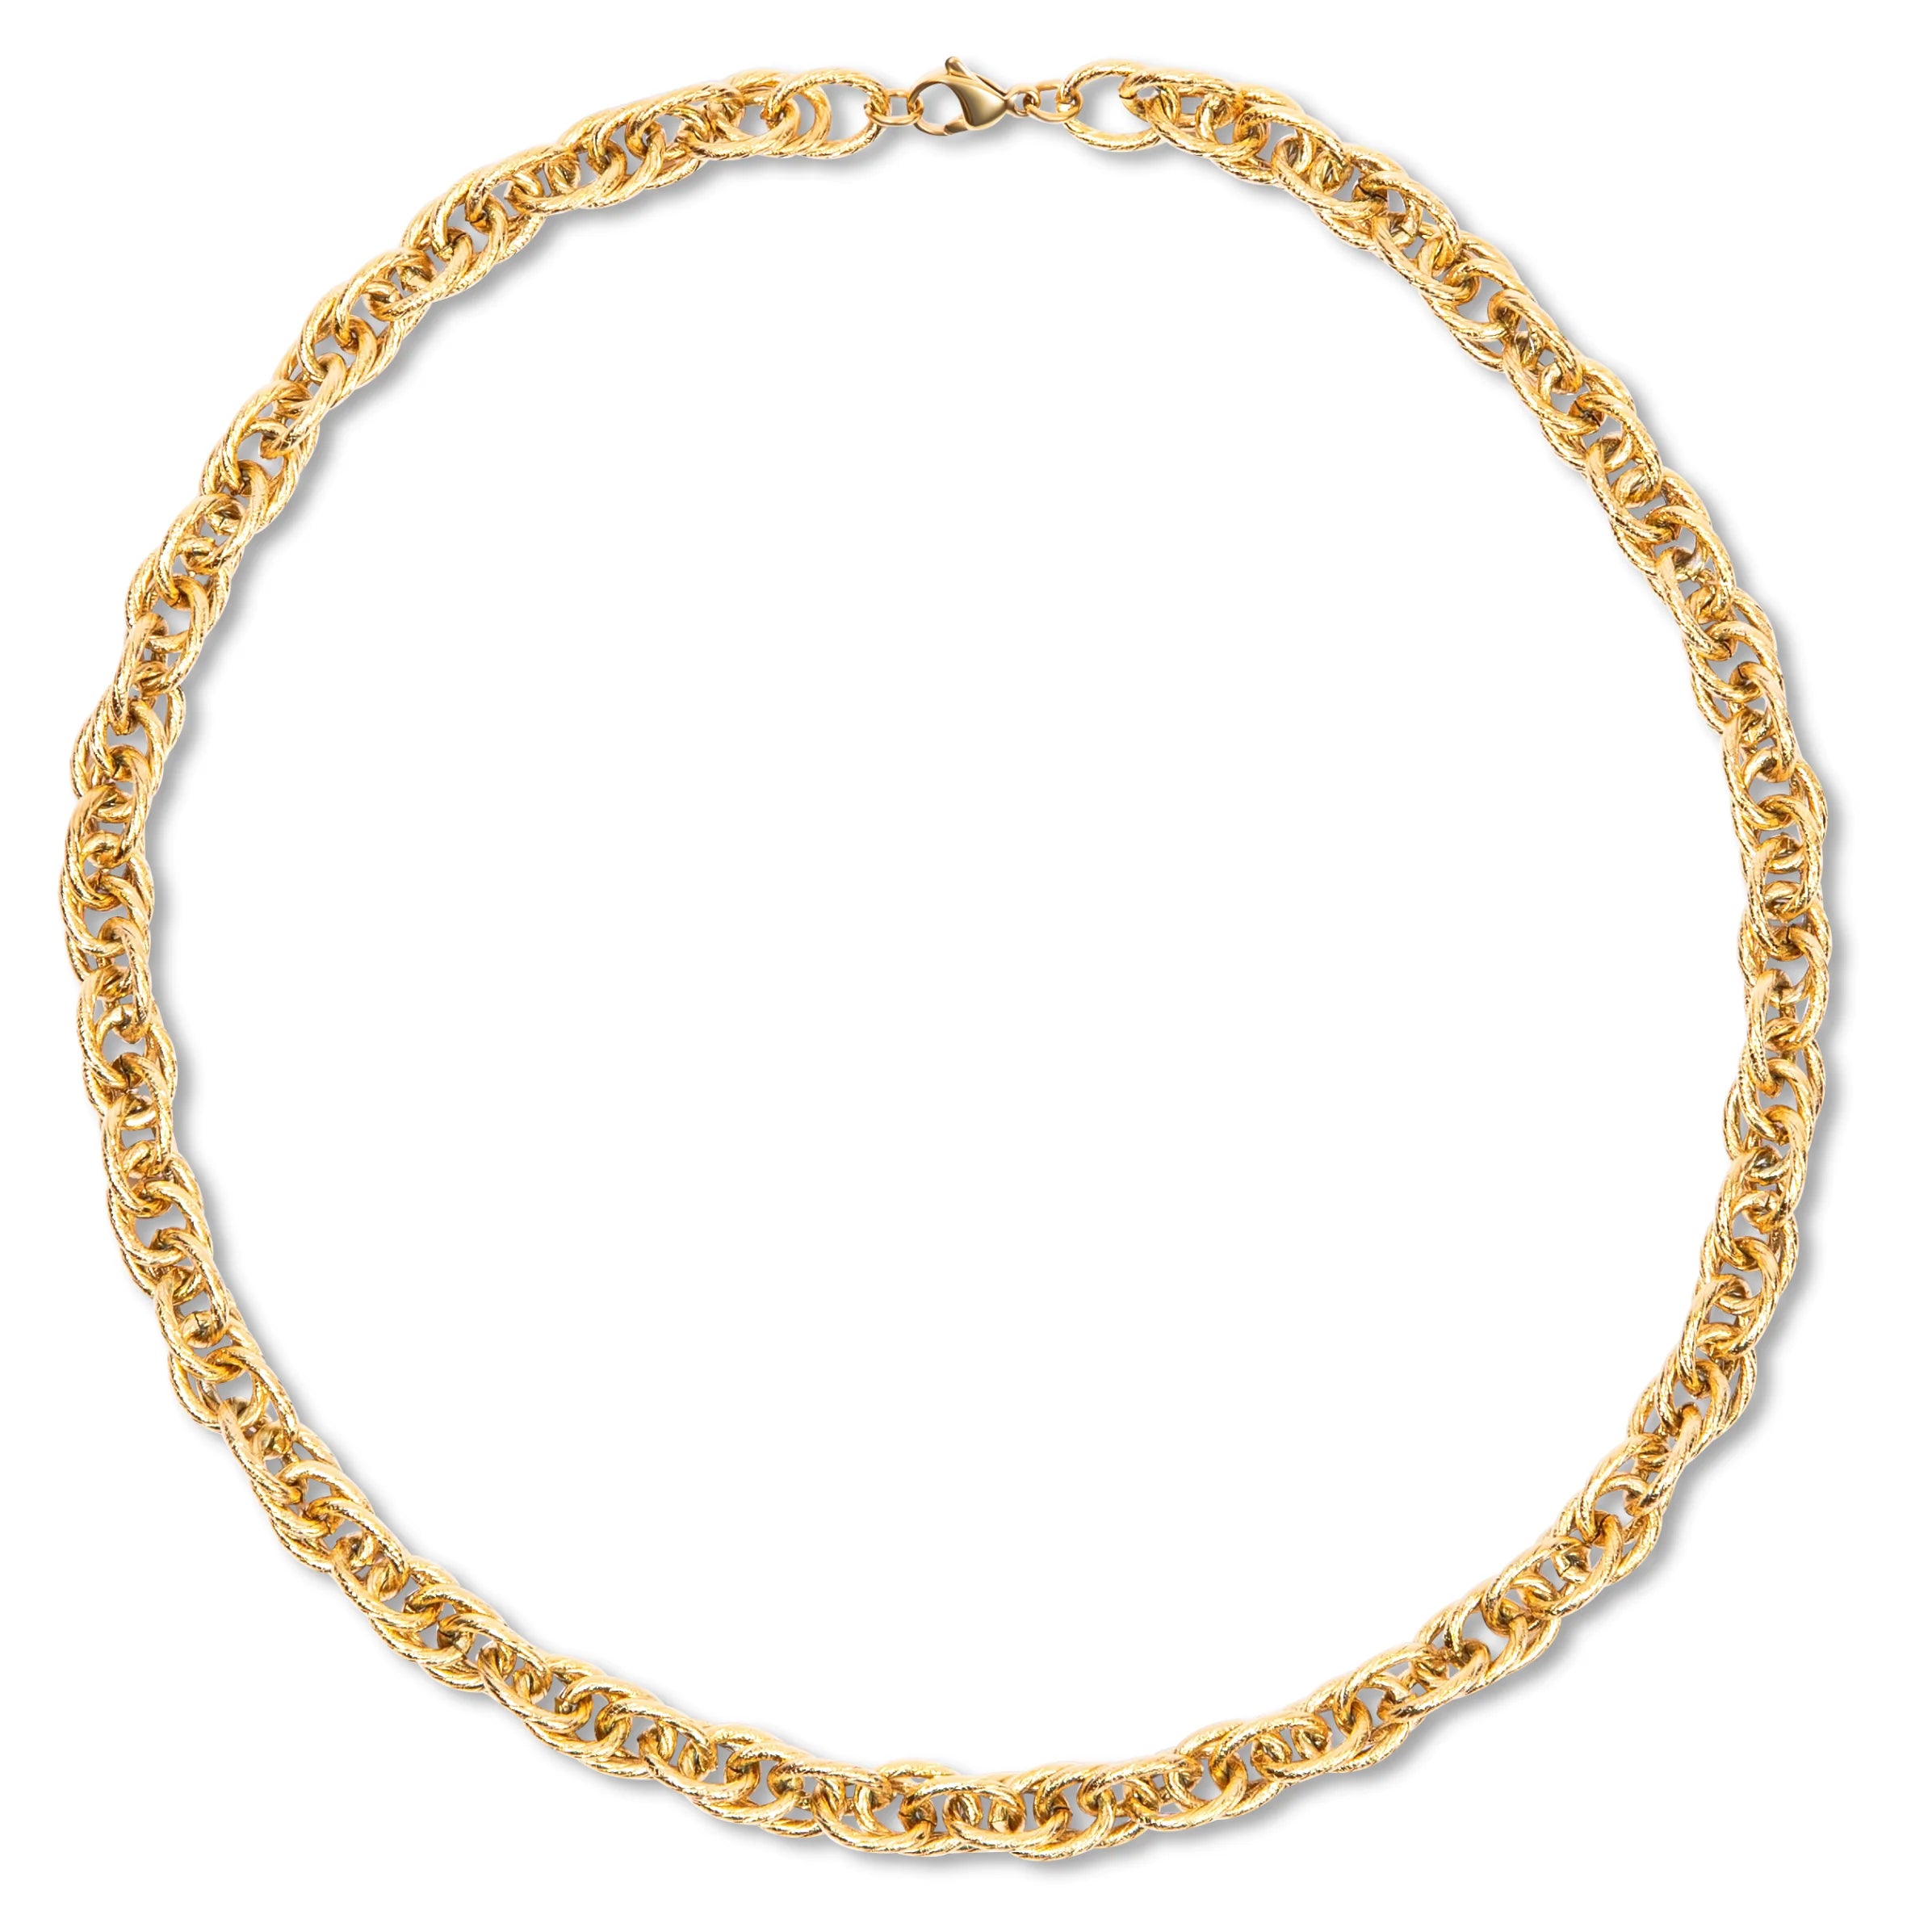 Ellie Vail Dixie Chunky Twist Chain Necklace